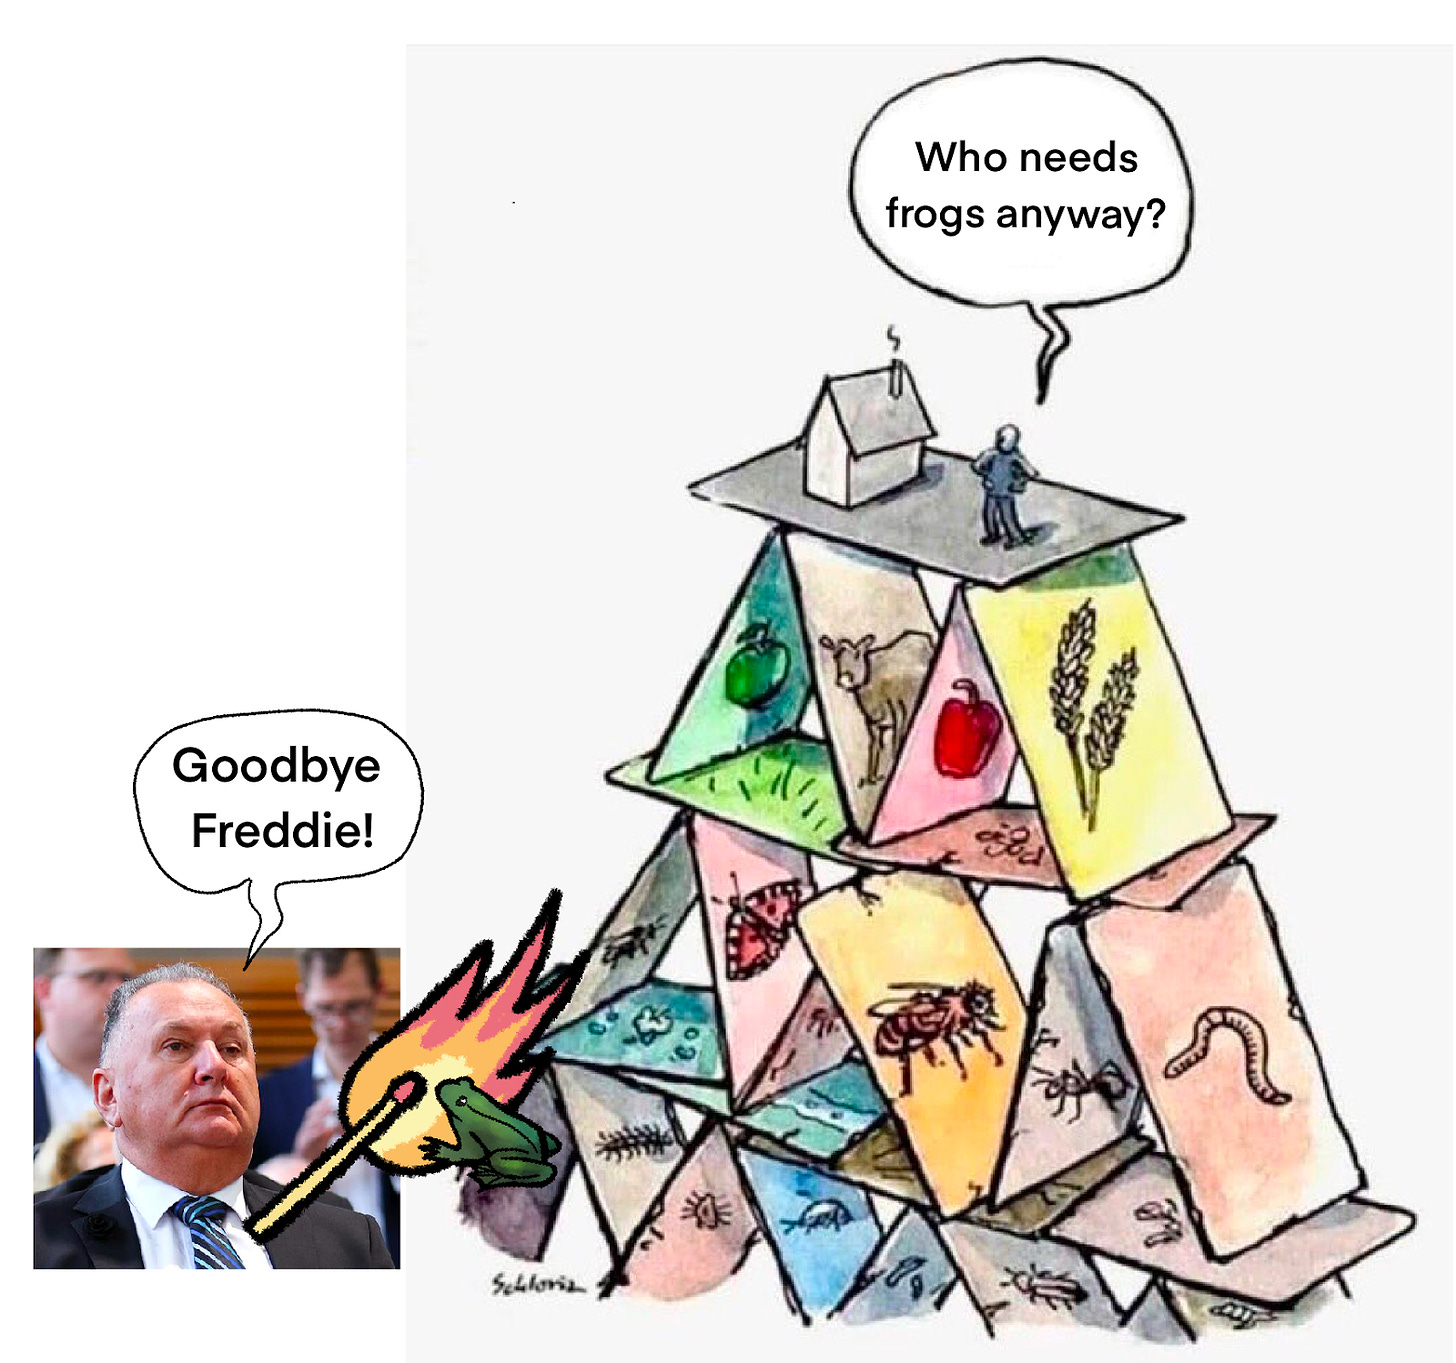 A house of cards depicting animals and plants of all kinds, with a human at the top. Shane Jones is setting fire to a frog at the bottom of the house of cards, saying 